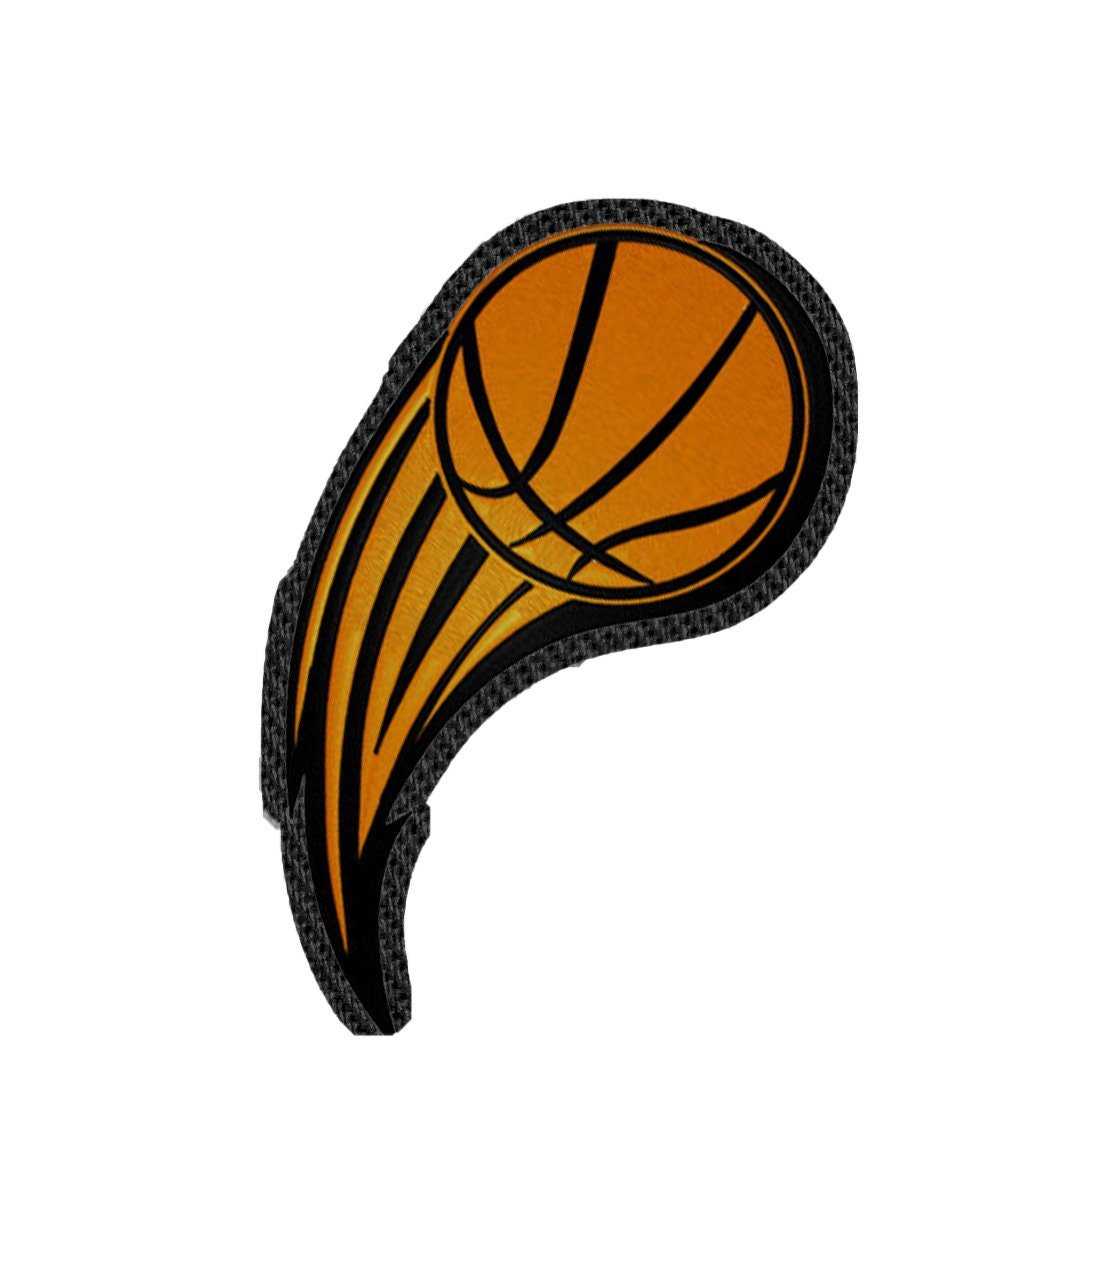 Basketball Ball Iron on Patch/Sew on embroidered patches Hobbies & Sports Embroidery Women Applique Merit Badge for Clothing Jacket